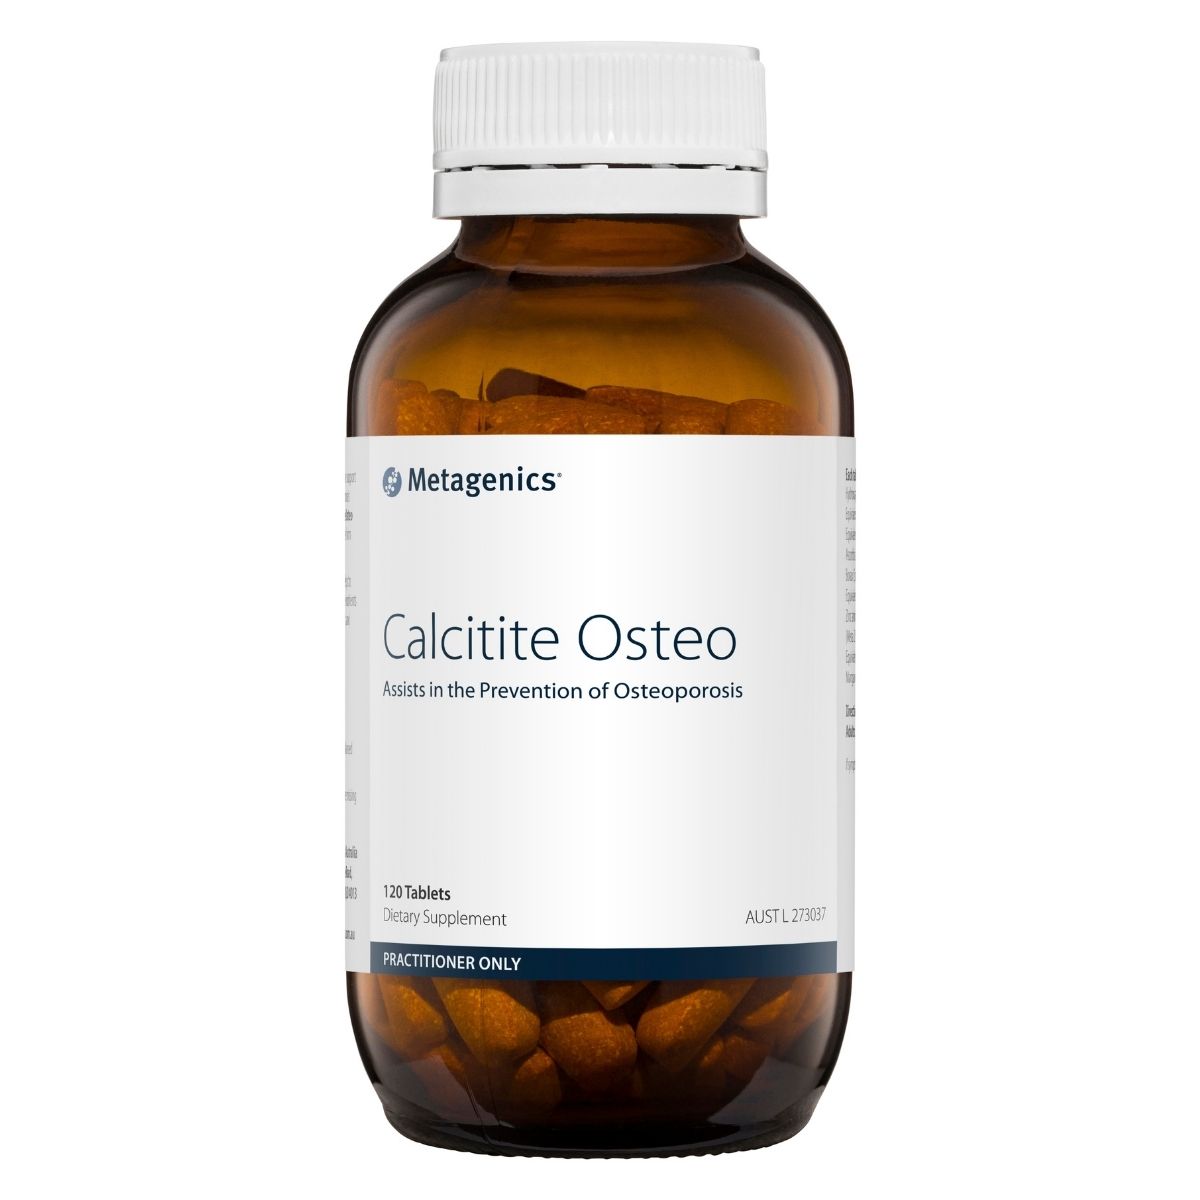 Metagenics Calcitite Osteo 120 Tablets | Vitality and Wellness Centre